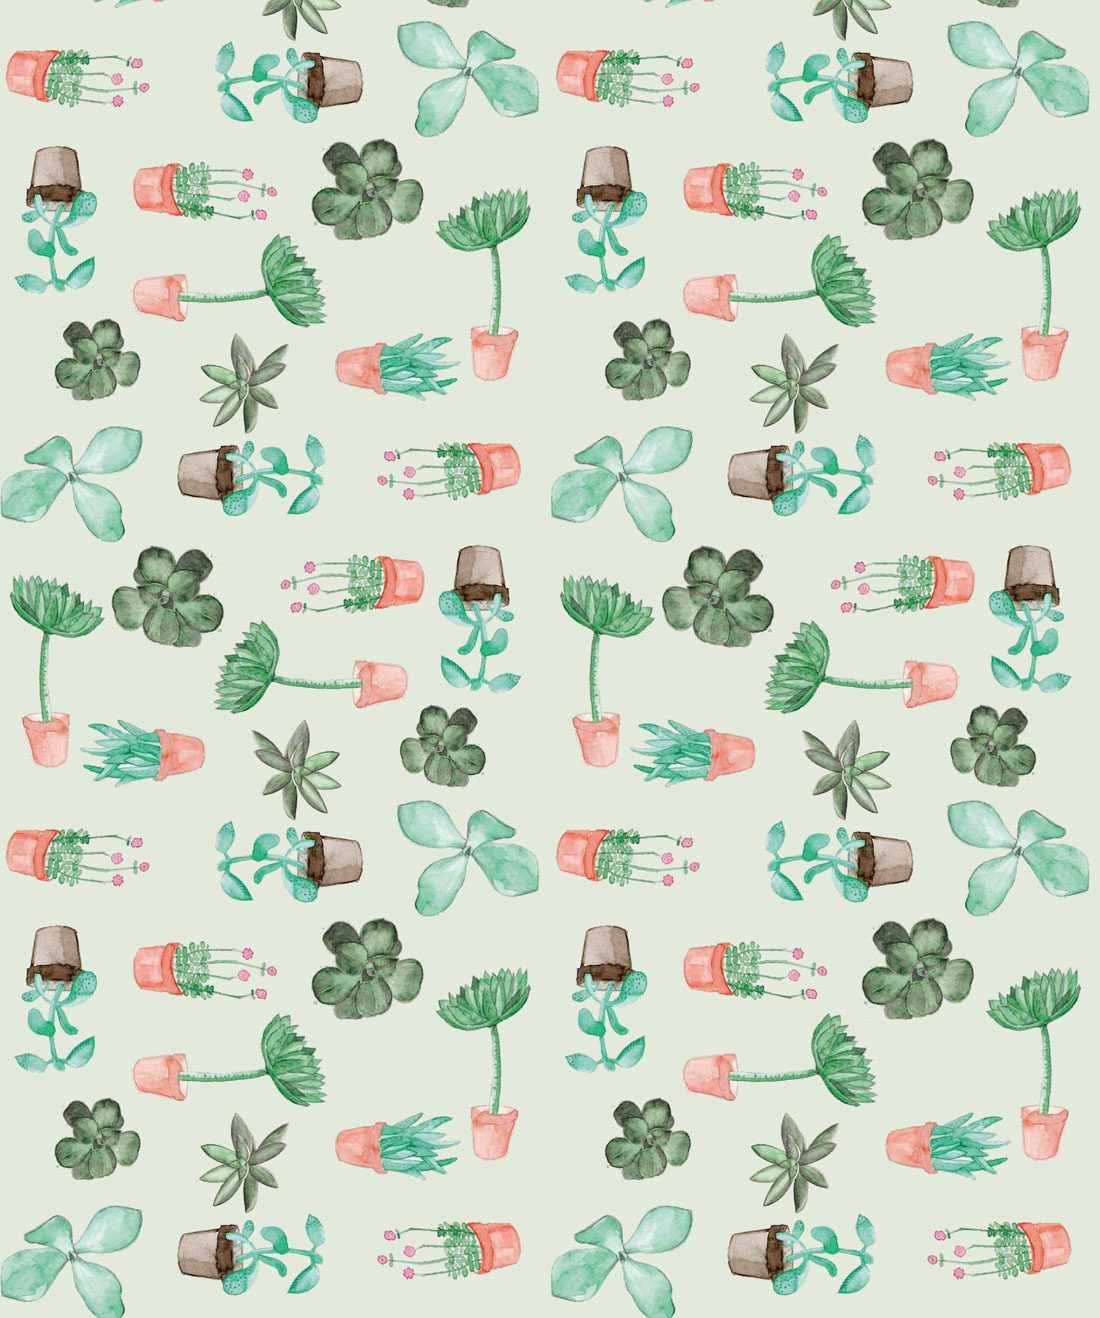 Succulents is a Potted Cactus Wallpaper